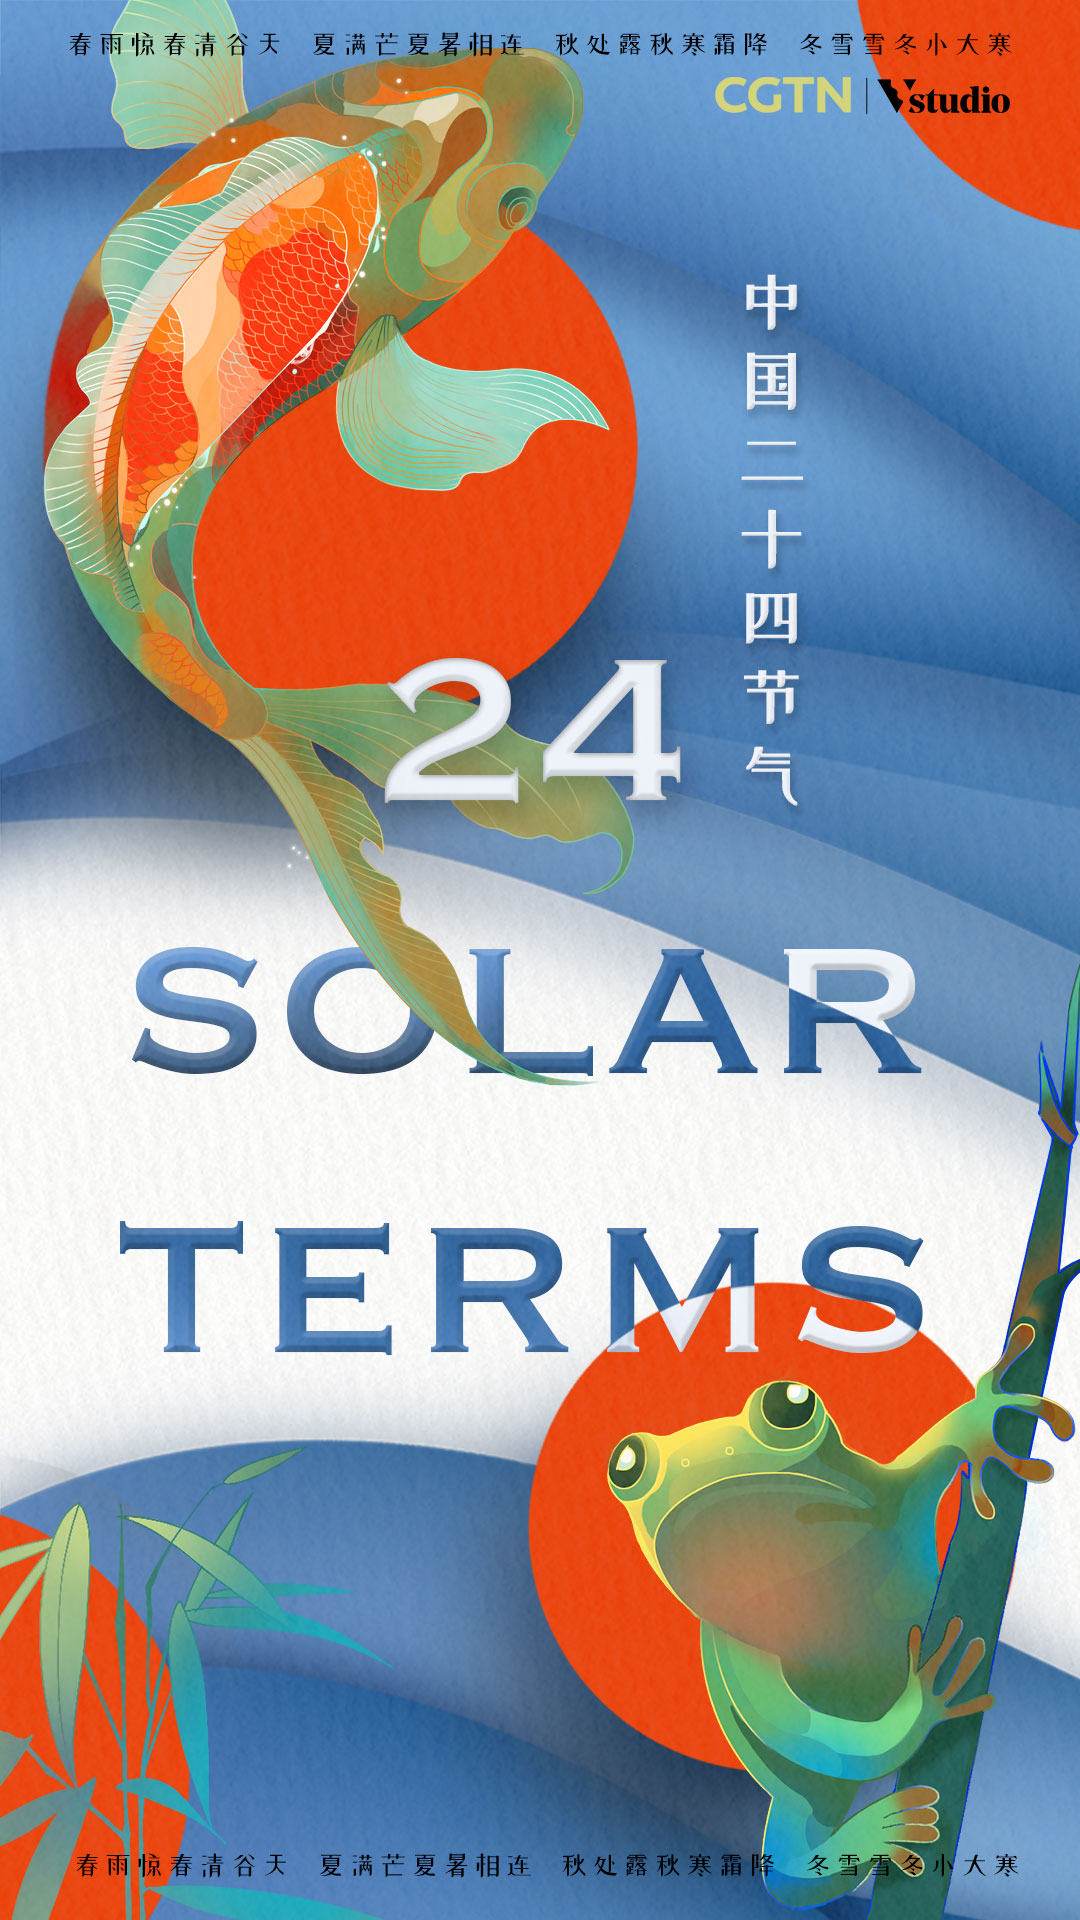 China's 24 Solar Terms: How CGTN gives a vivid touch on seasonal changes